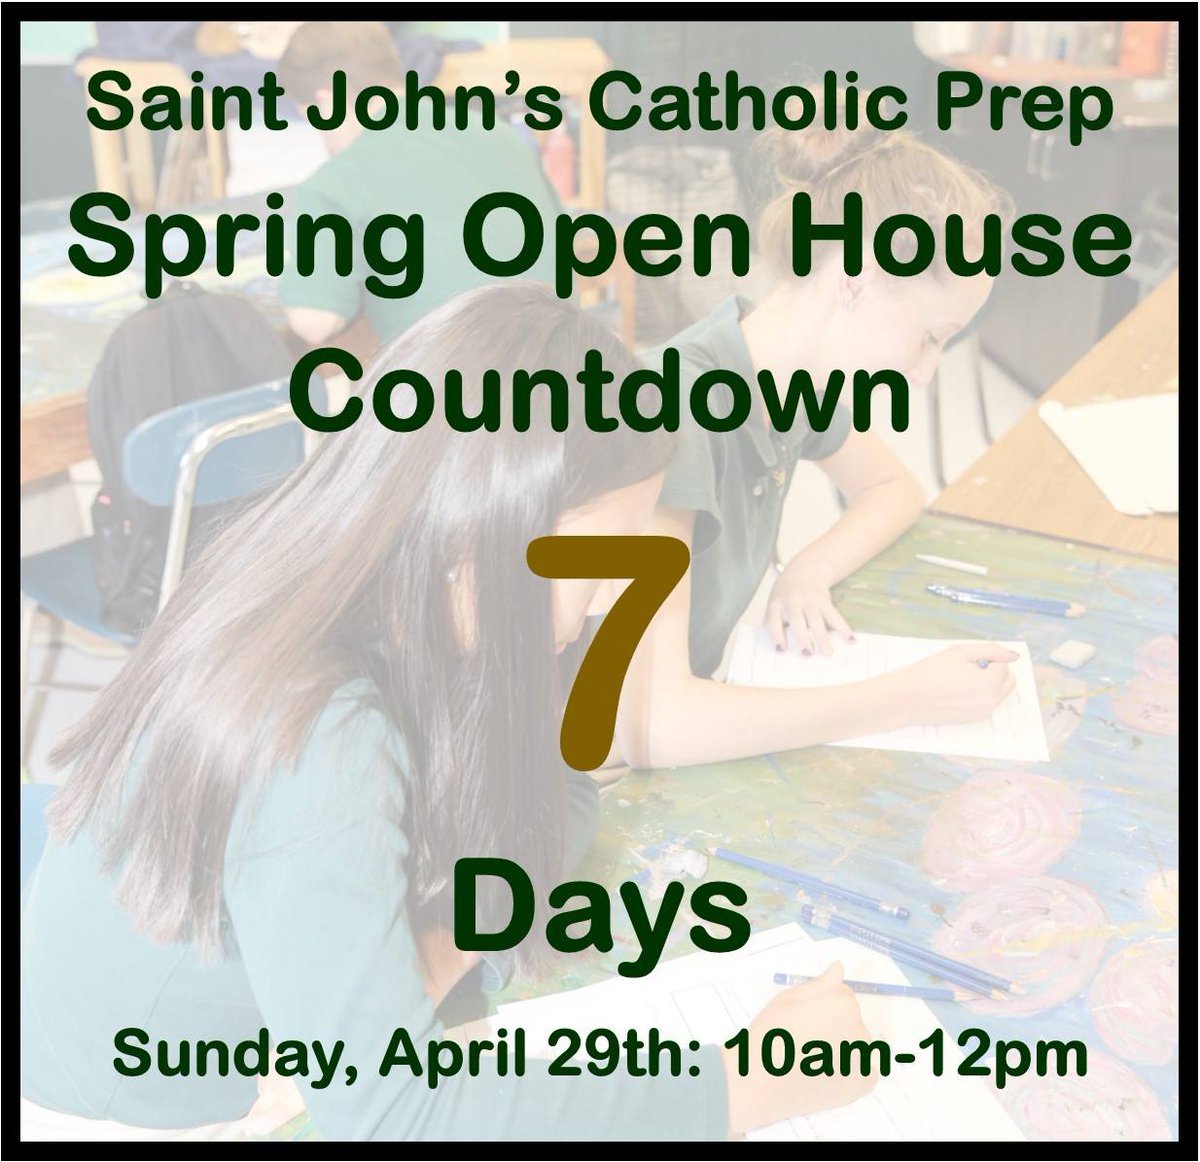 We are only 1 week away from our Spring Open House! Stop by and learn about SJCP next Sunday! #onceavikingalwaysaviking #springopenhouse #catholicprep